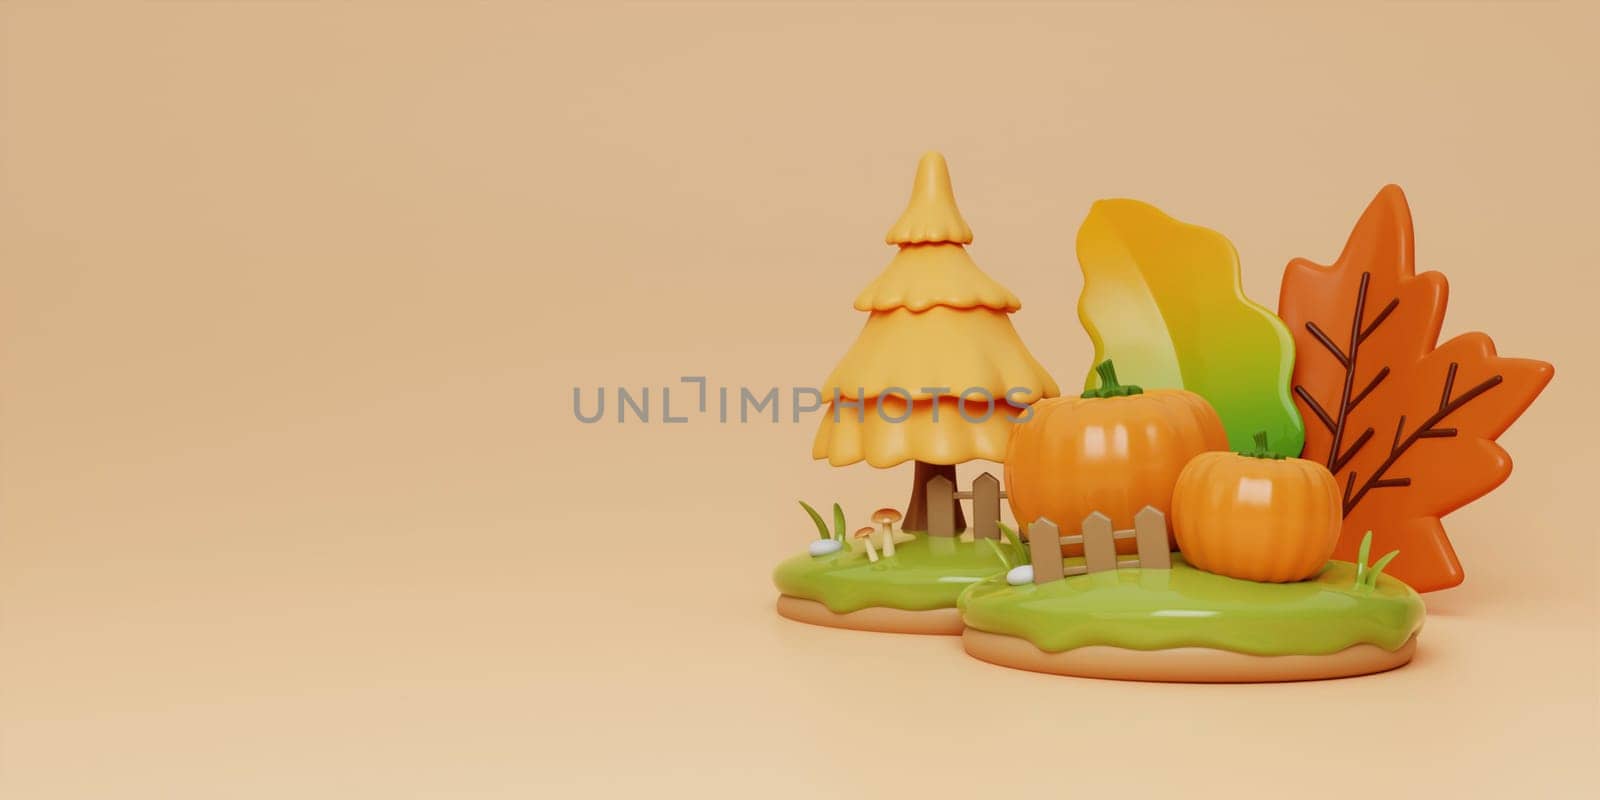 Autumn Display Background with pine tree, Autumn leaves and empty minimal podium pedestal product display. 3d render illustration. by meepiangraphic